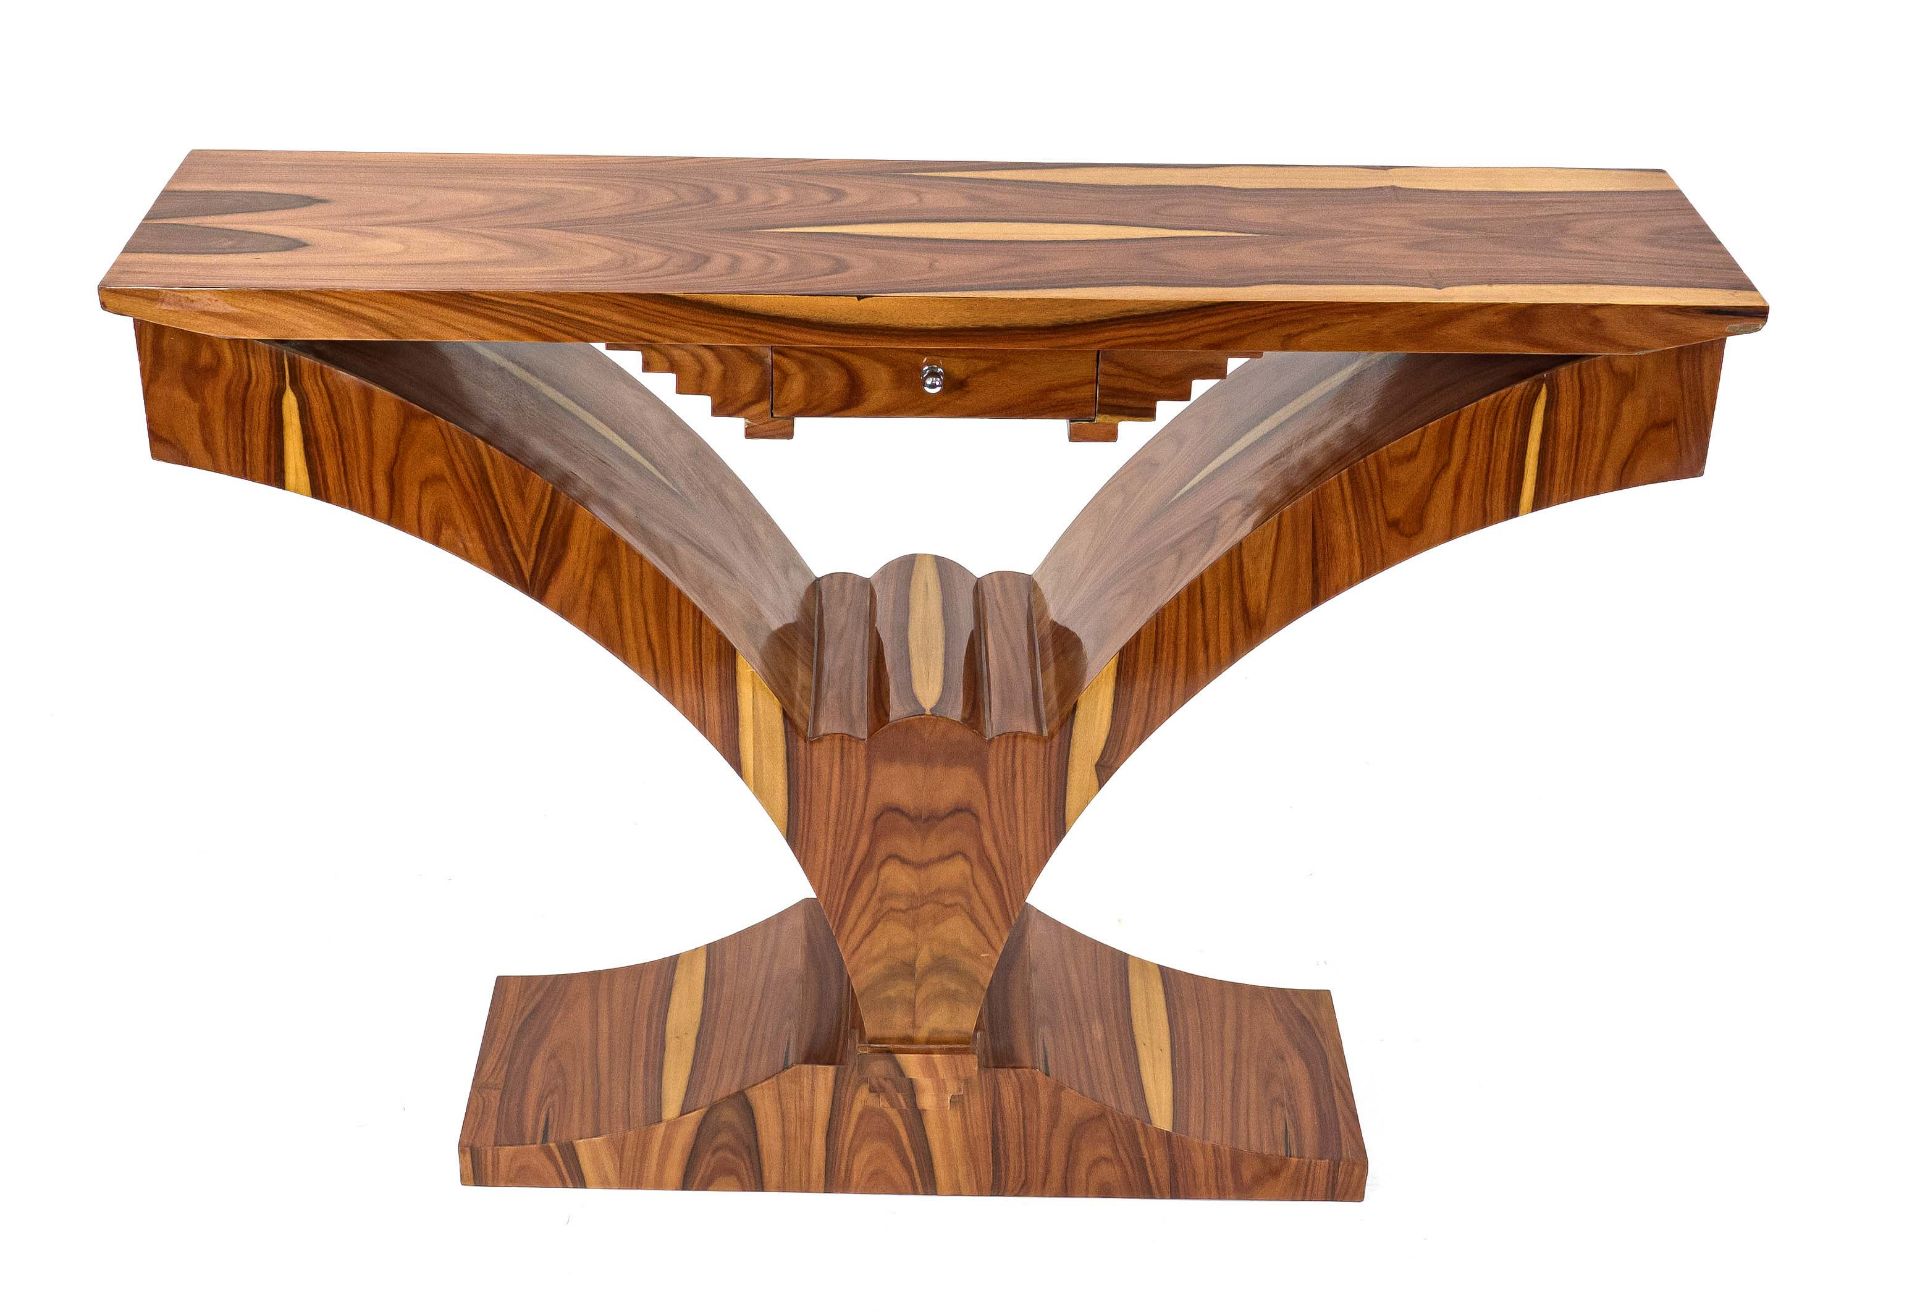 Console table in Art Deco style, late 20th century, walnut, one drawer, 87 x 120 x 30 cm - The